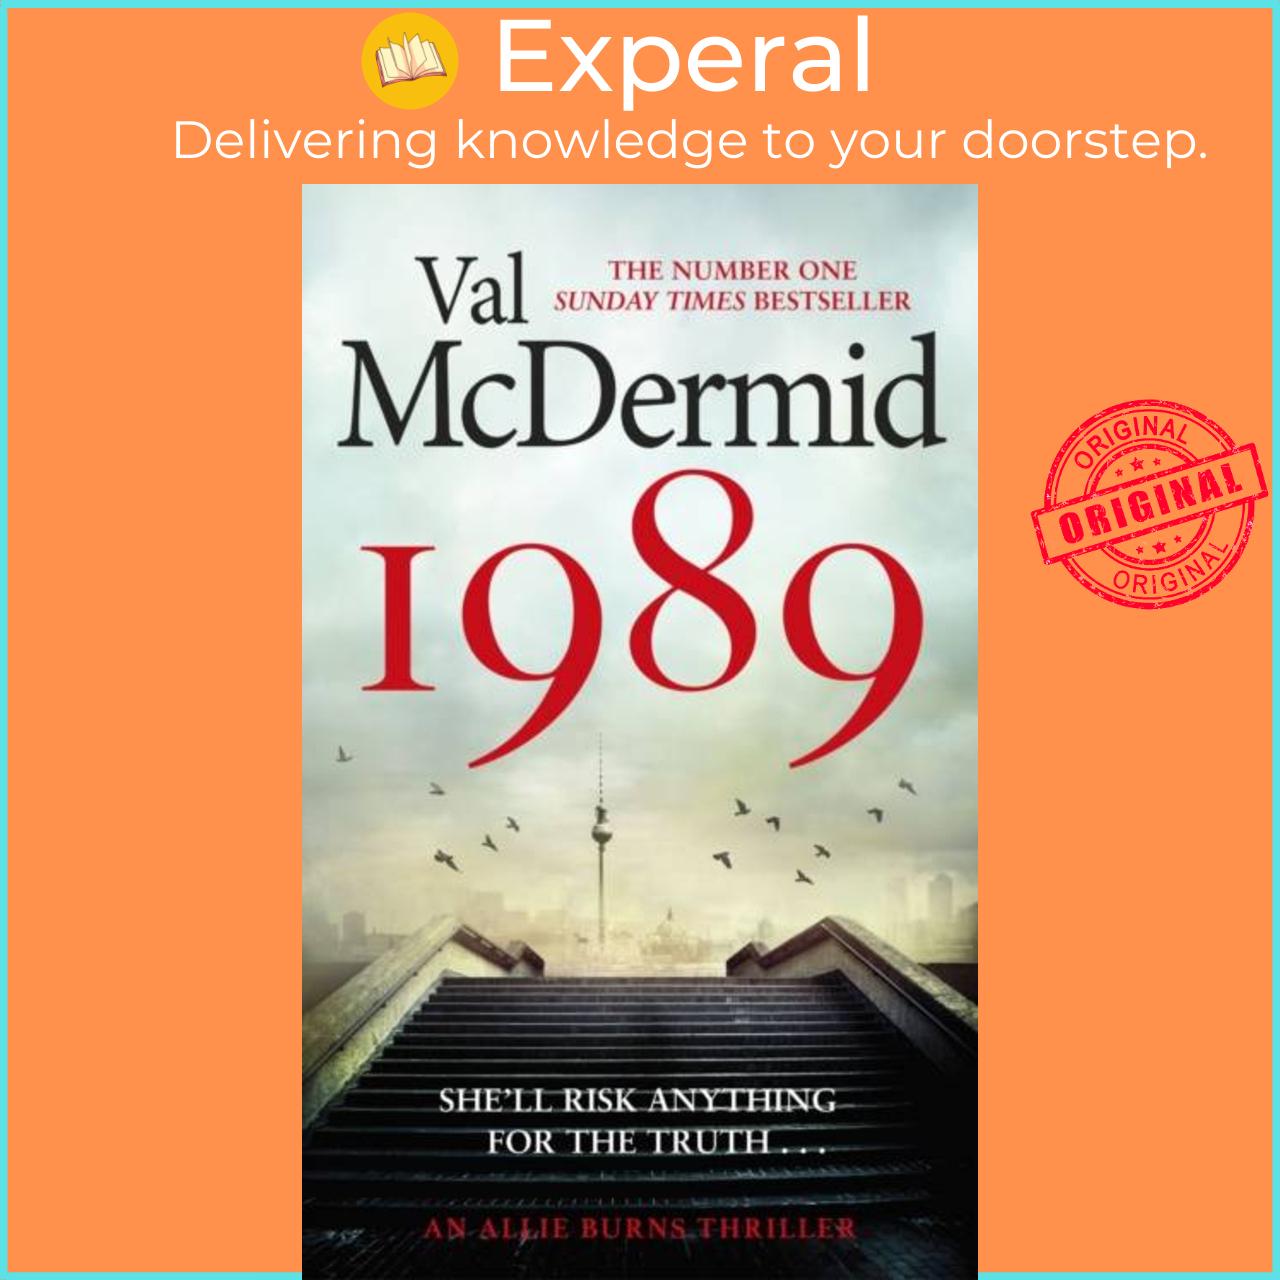 Sách - 1989 by Val McDermid (UK edition, paperback)